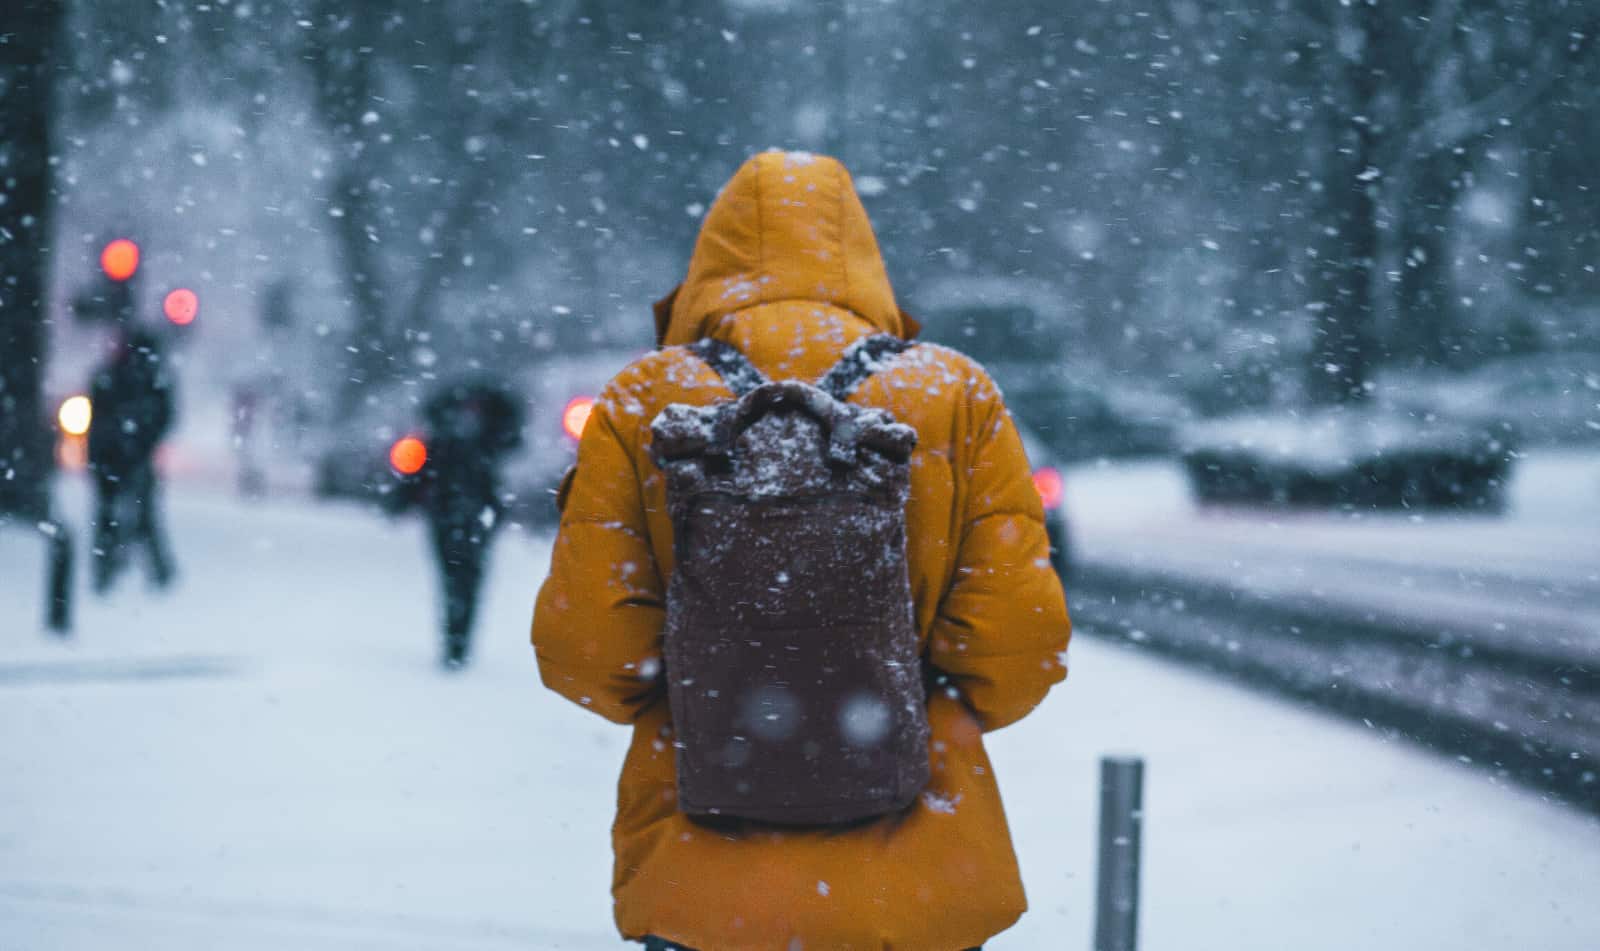 Slip And Fall Injury: Who’s Liable For Icy Sidewalk Injuries?